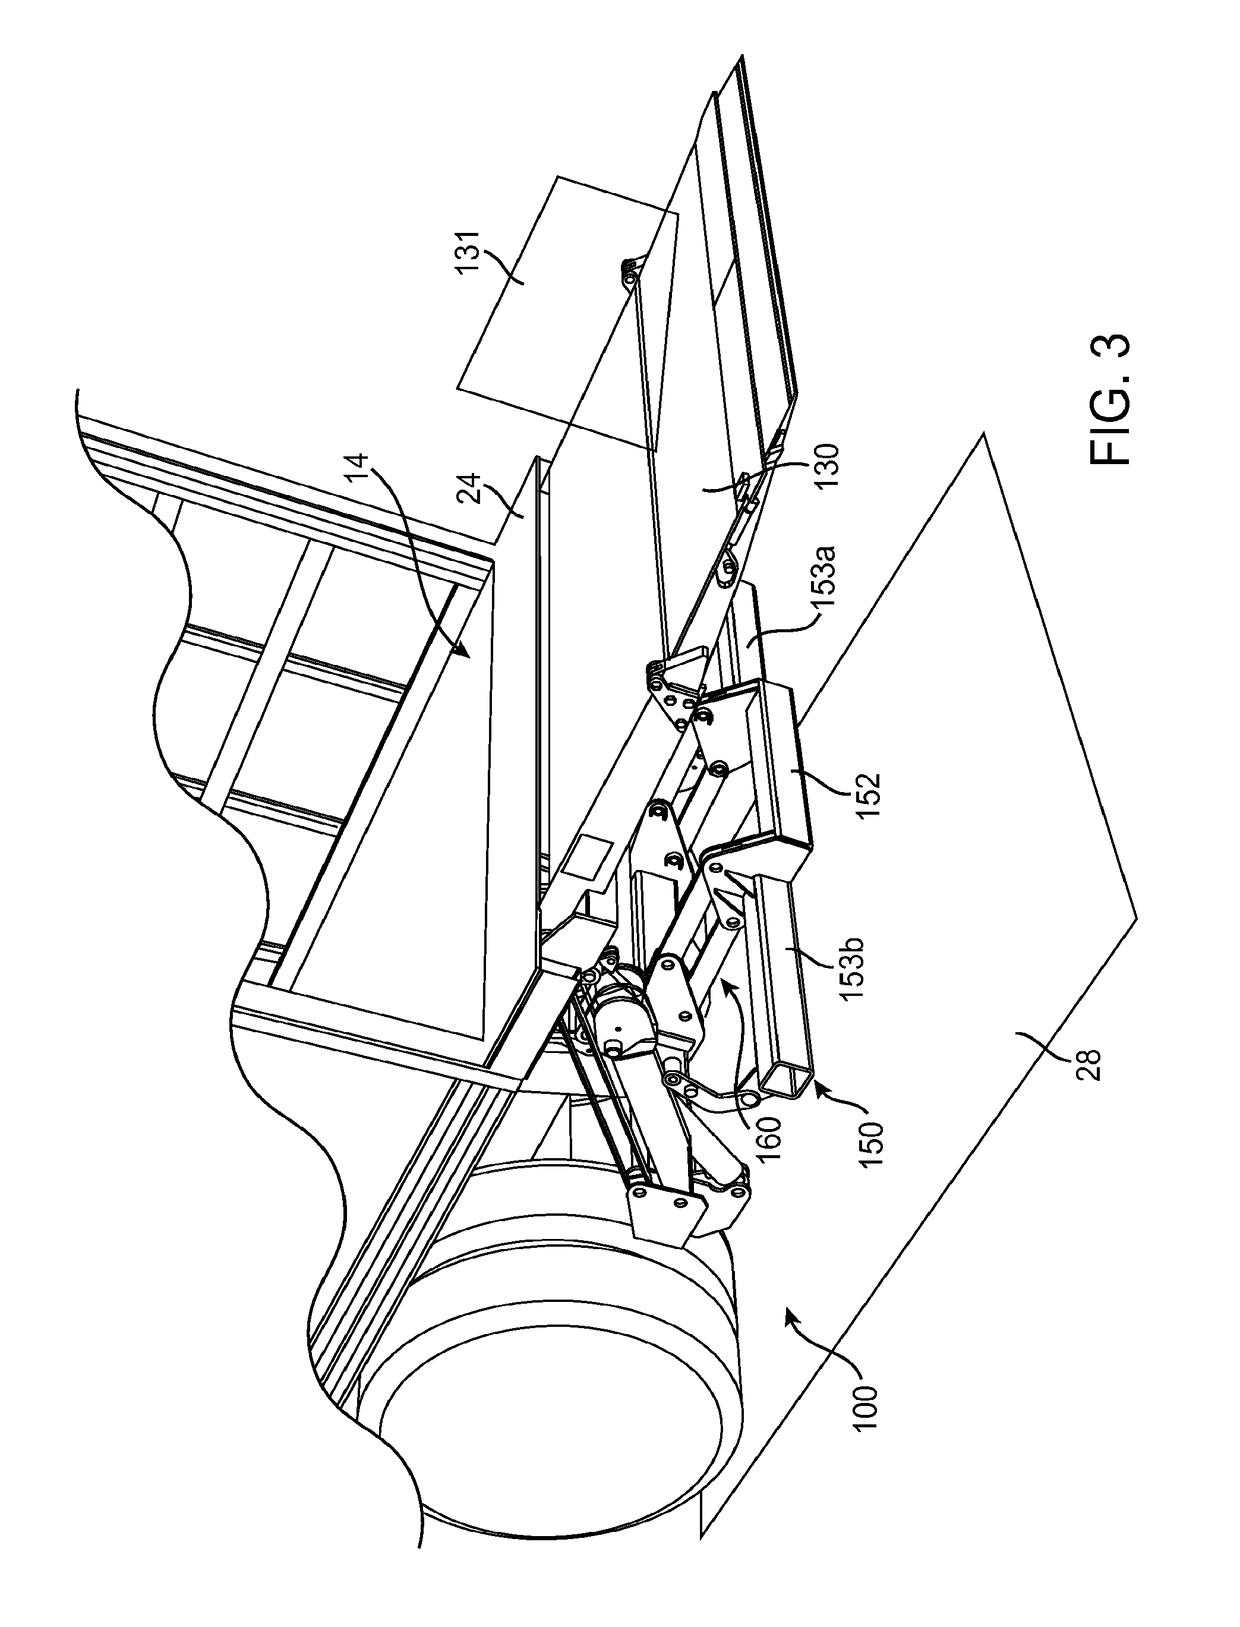 Mounting system for vehicle underride